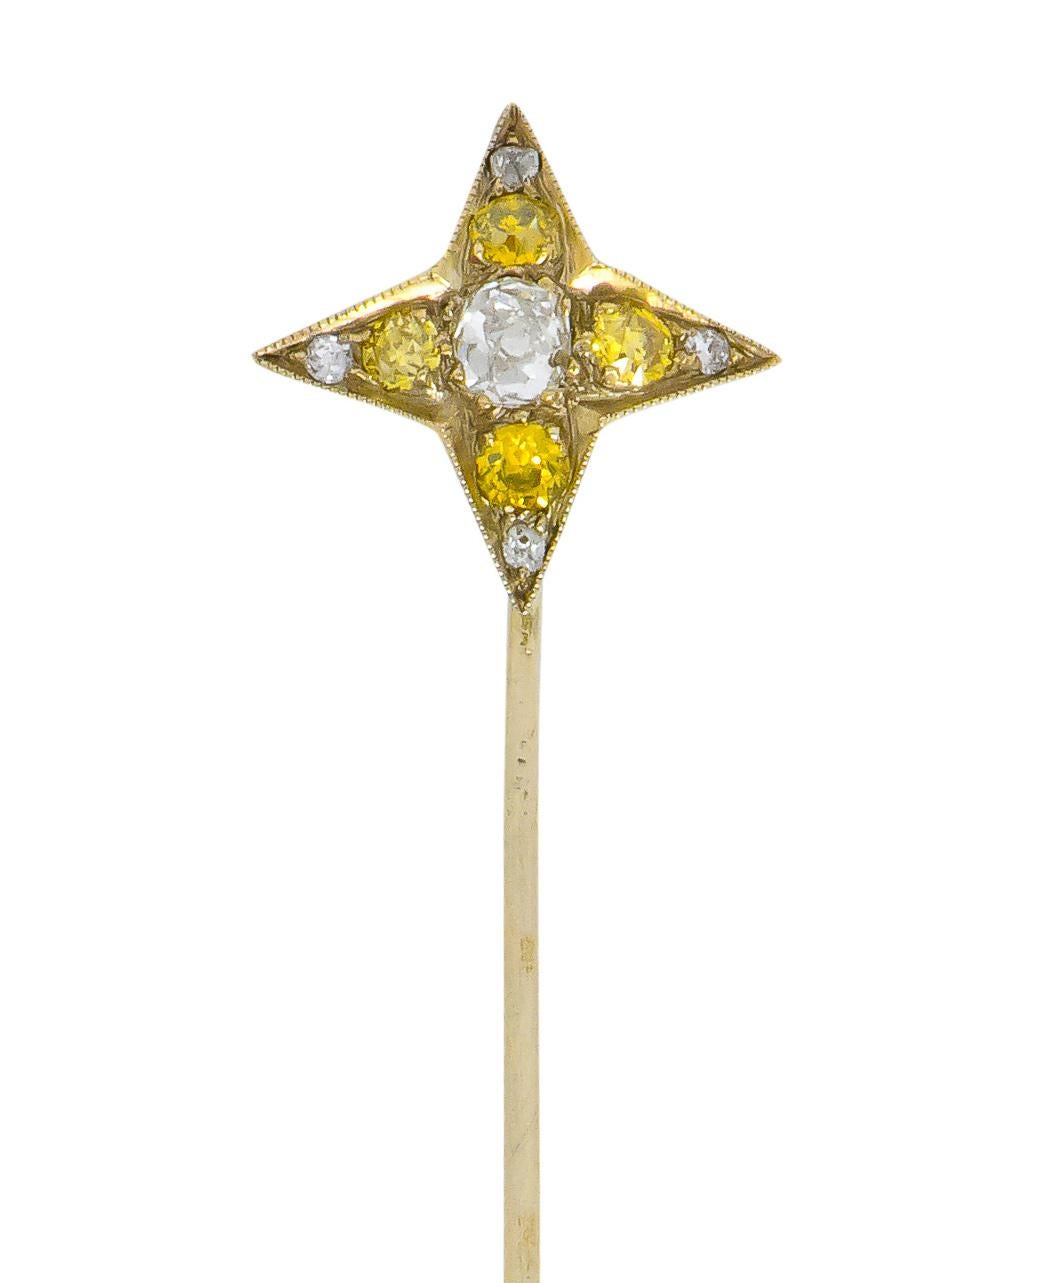 Star shaped platinum mount centering an old mine cut diamond weighing approximately 0.23 carat, I color and I clarity

Surrounded by four, sunny yellow old European cut diamonds weighing approximately 0.24 carat total, SI to I clarity

Accented by